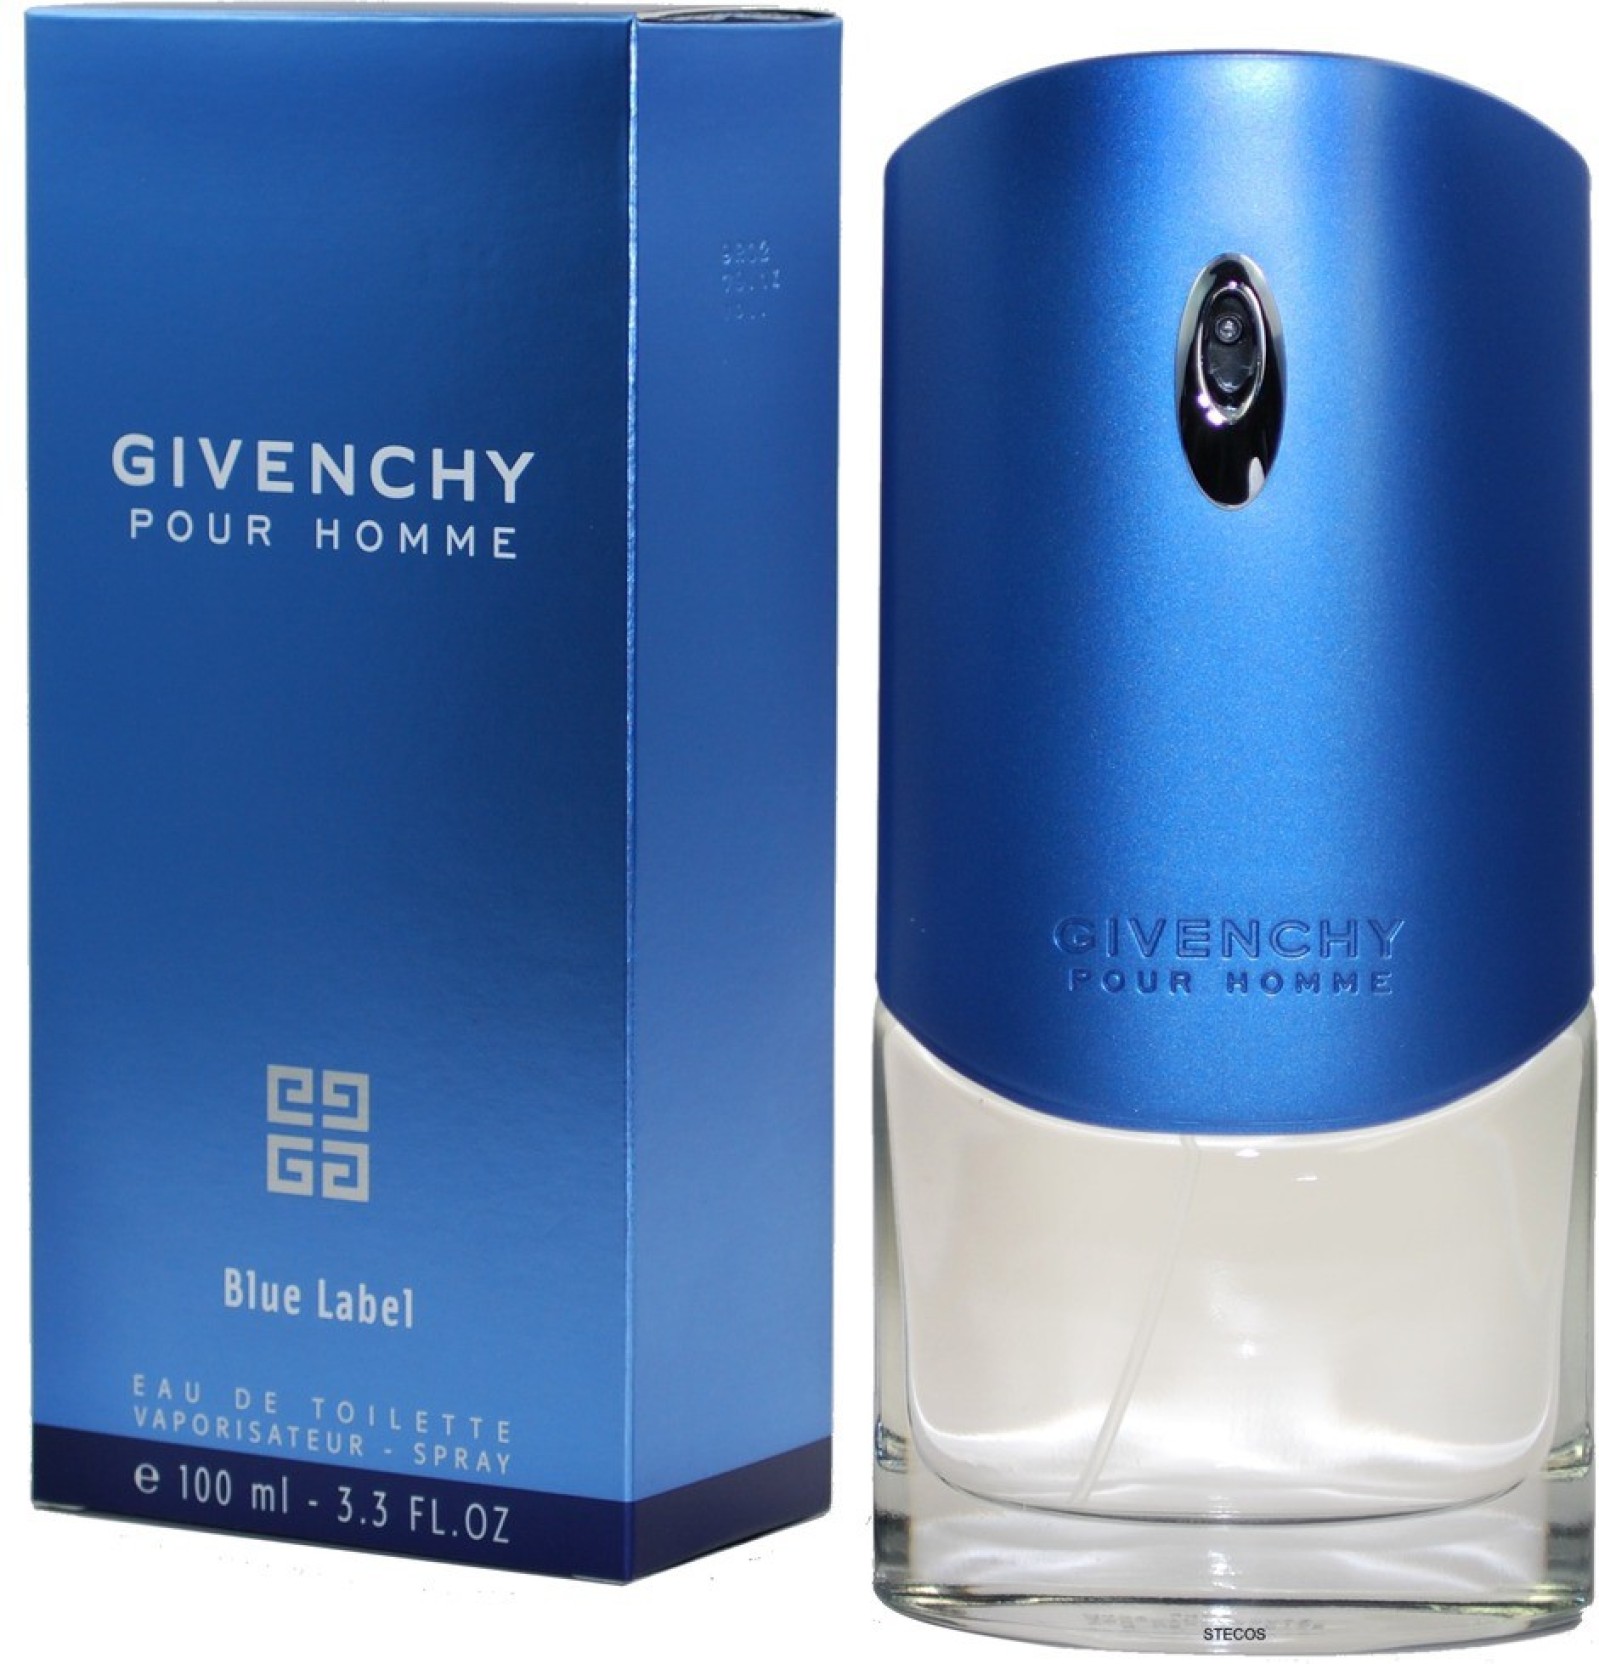 Живанши мужские летуаль. Givenchy pour homme Blue Label. Givenchy Blue Label 100ml. Givenchy pour homme Blue Label Givenchy. Givenchy pour homme Blue Label EDT, 100 ml.